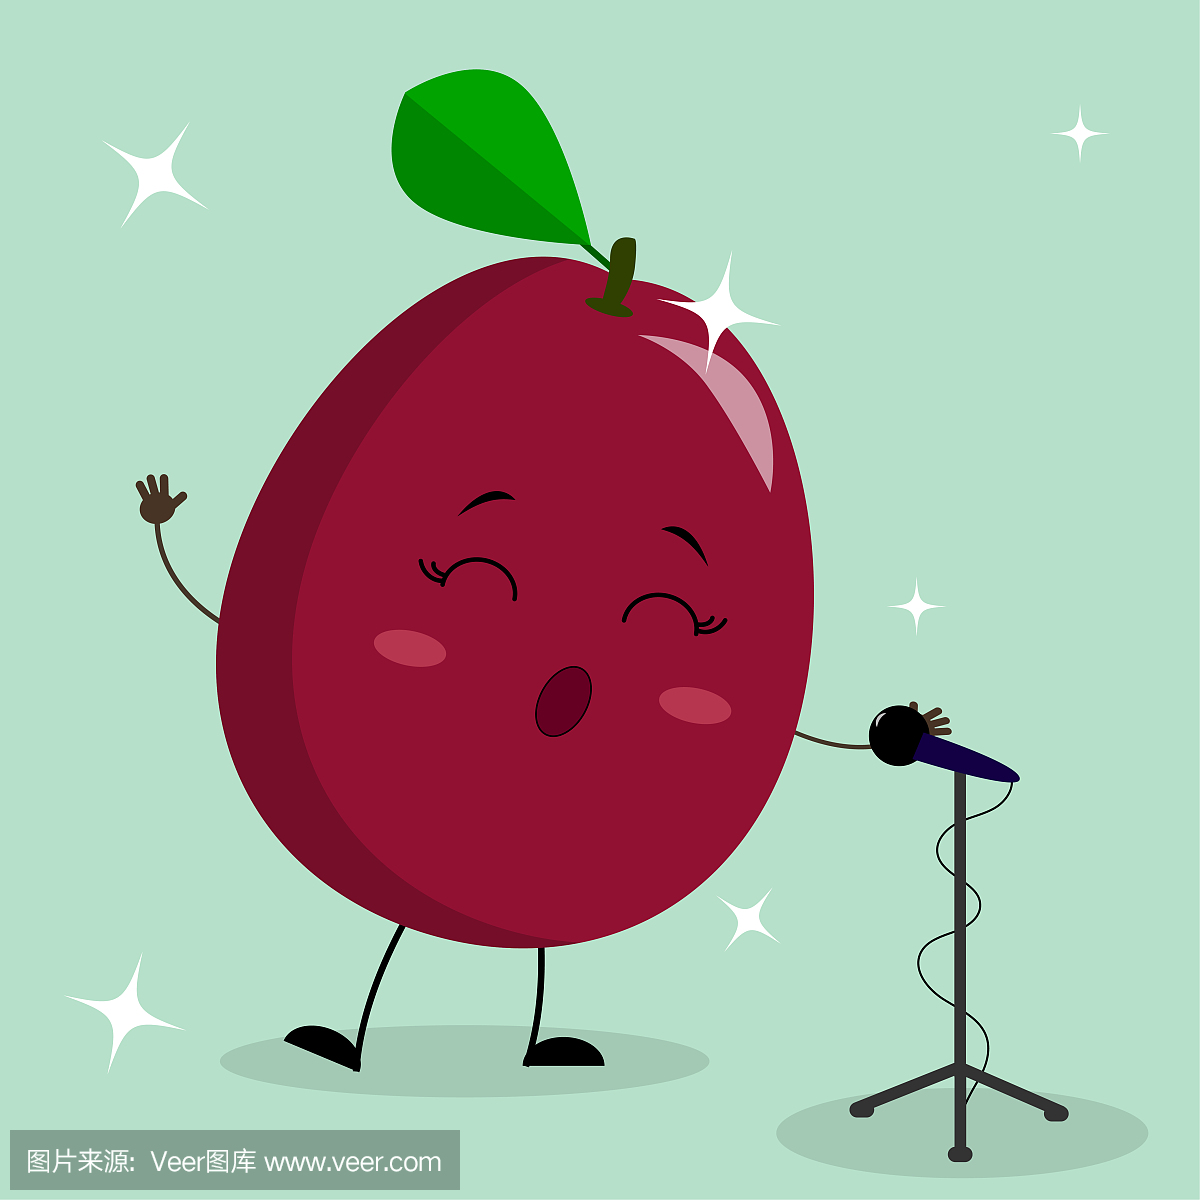 Сute plum Smiley in a cartoon style sings into t